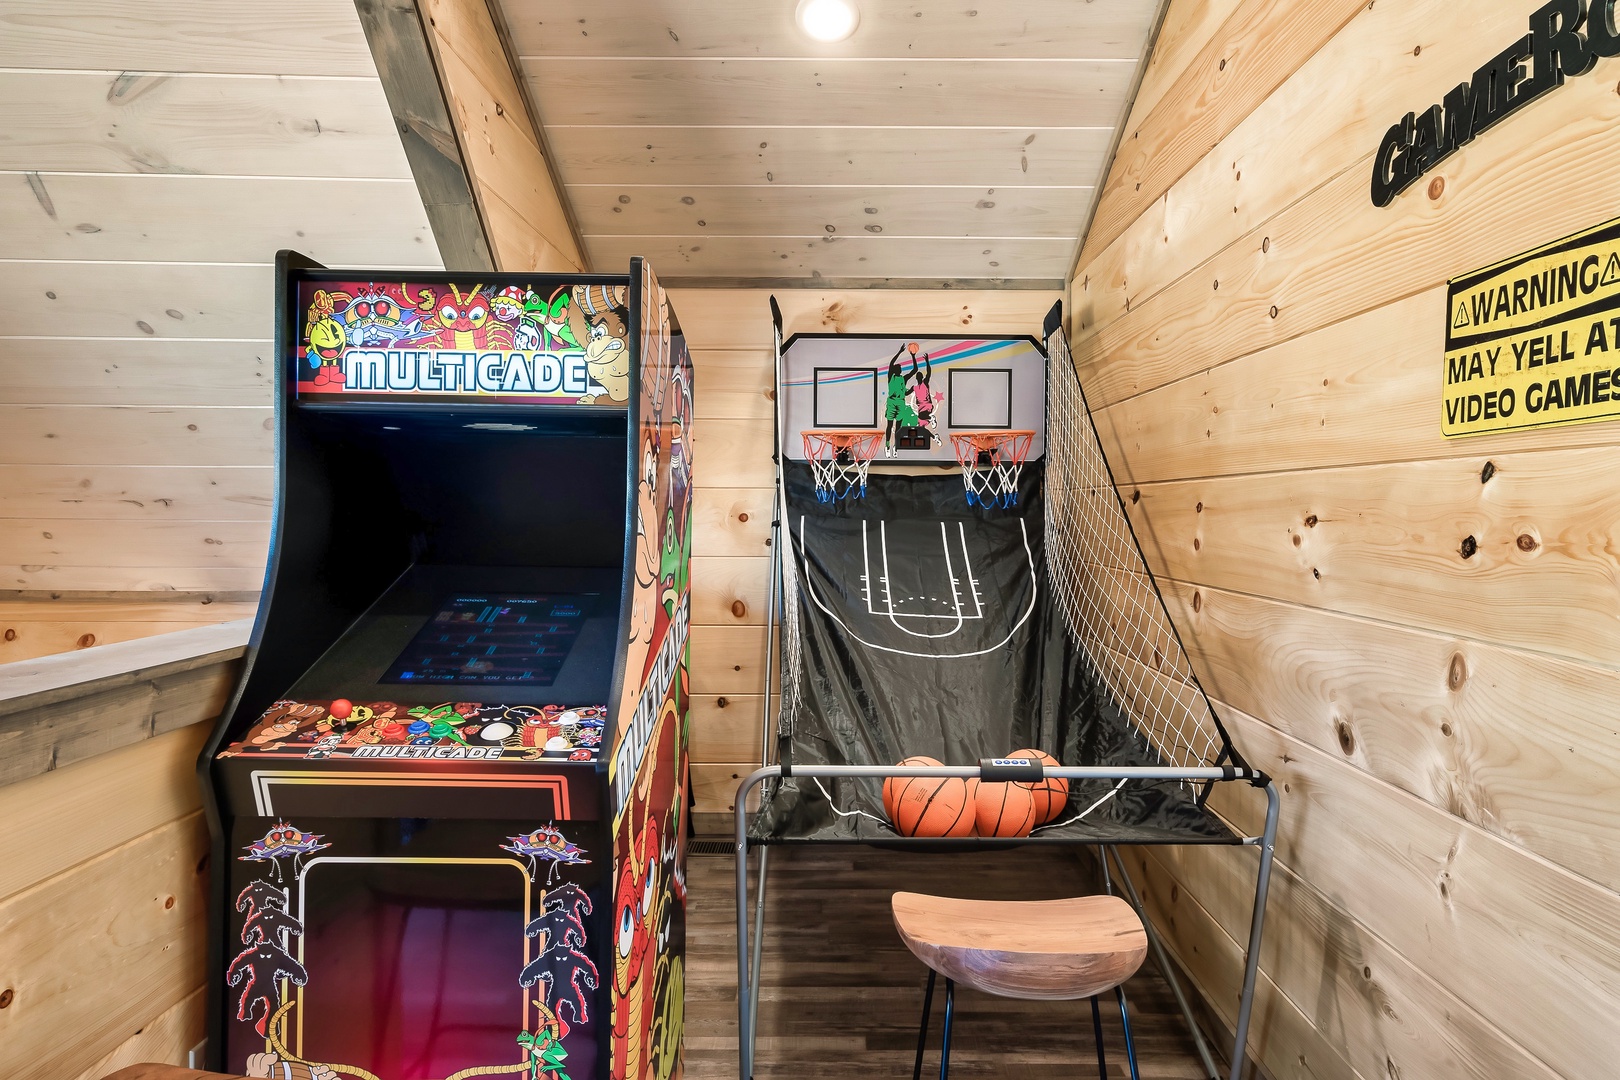 2nd floor landing game room with air hockey and arcade games